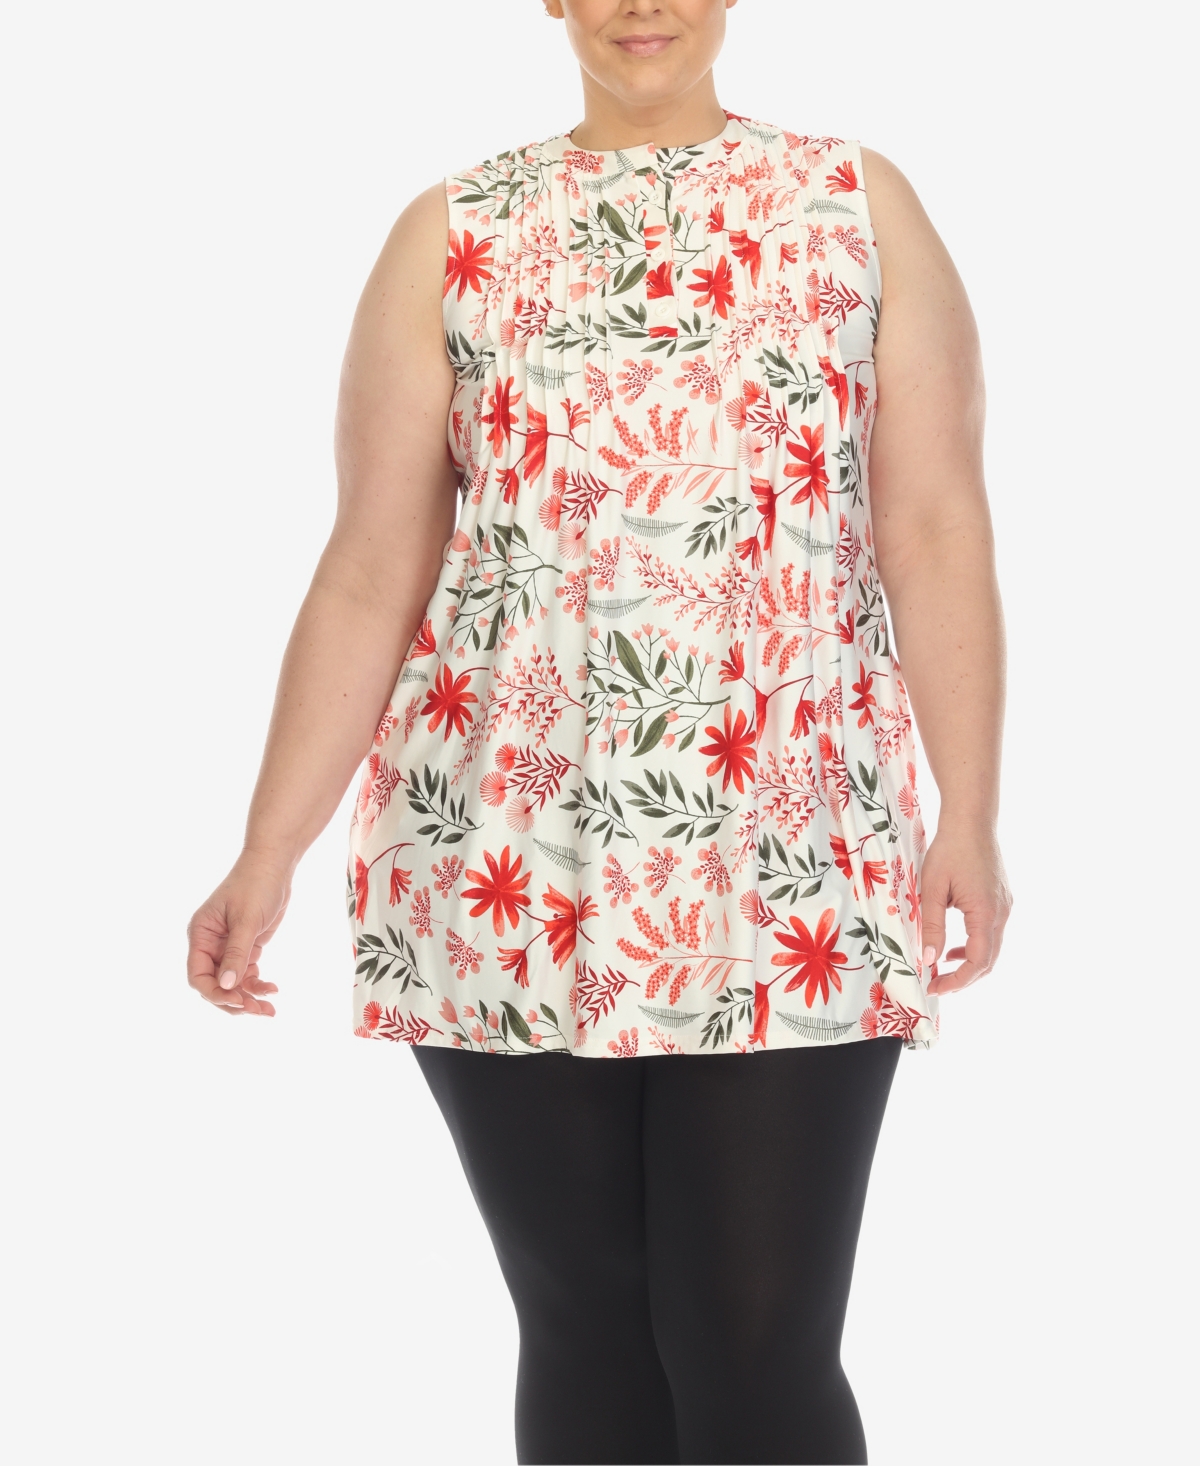 White Mark Women's Plus Size Floral Sleeveless Tunic Top In Red